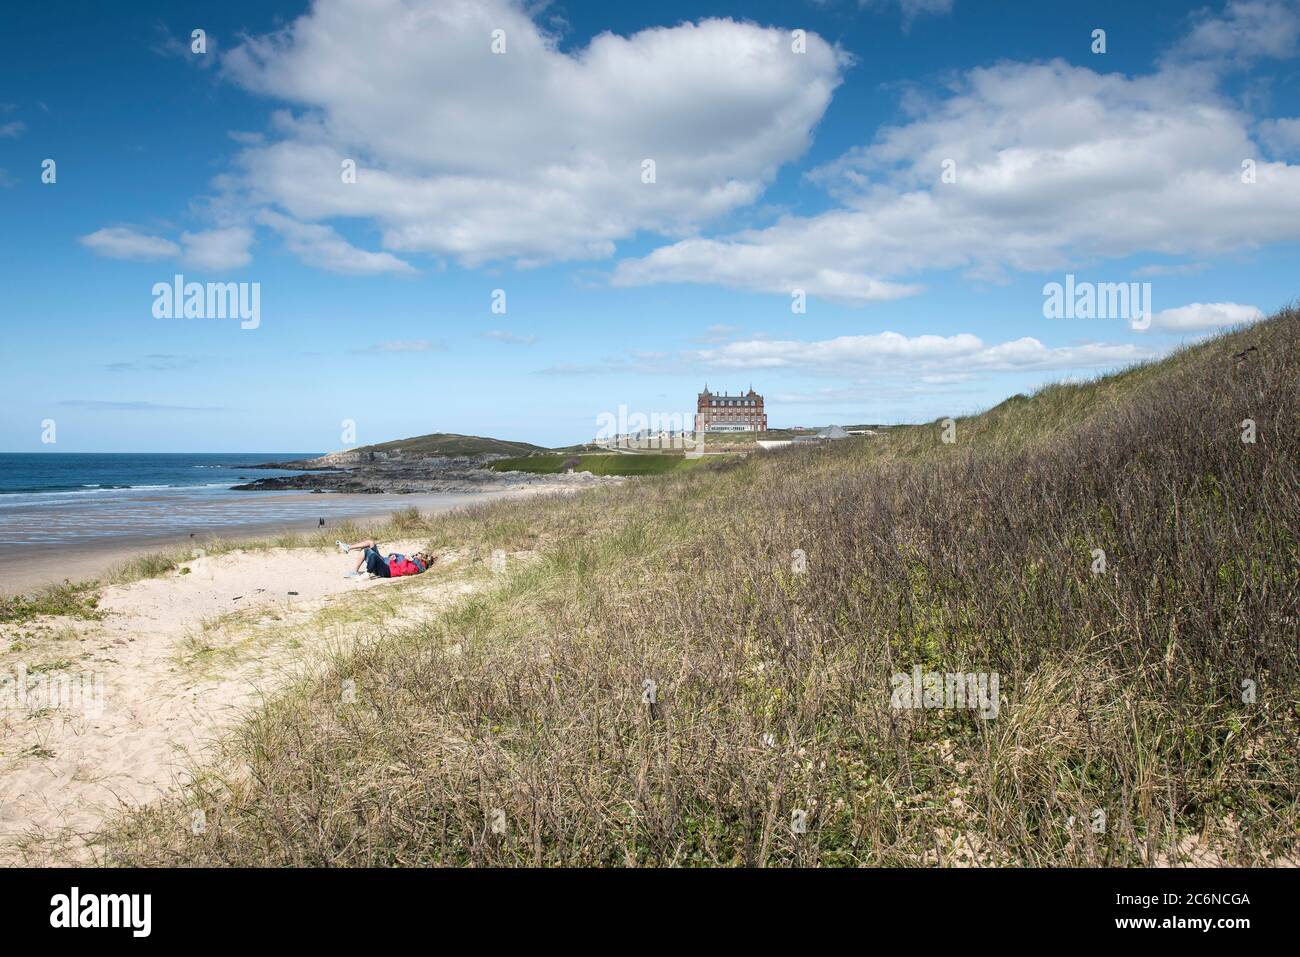 A couple relaxing together in the sand dune system overlooking Fistral Beach in Newquay in Cornwall. Stock Photo